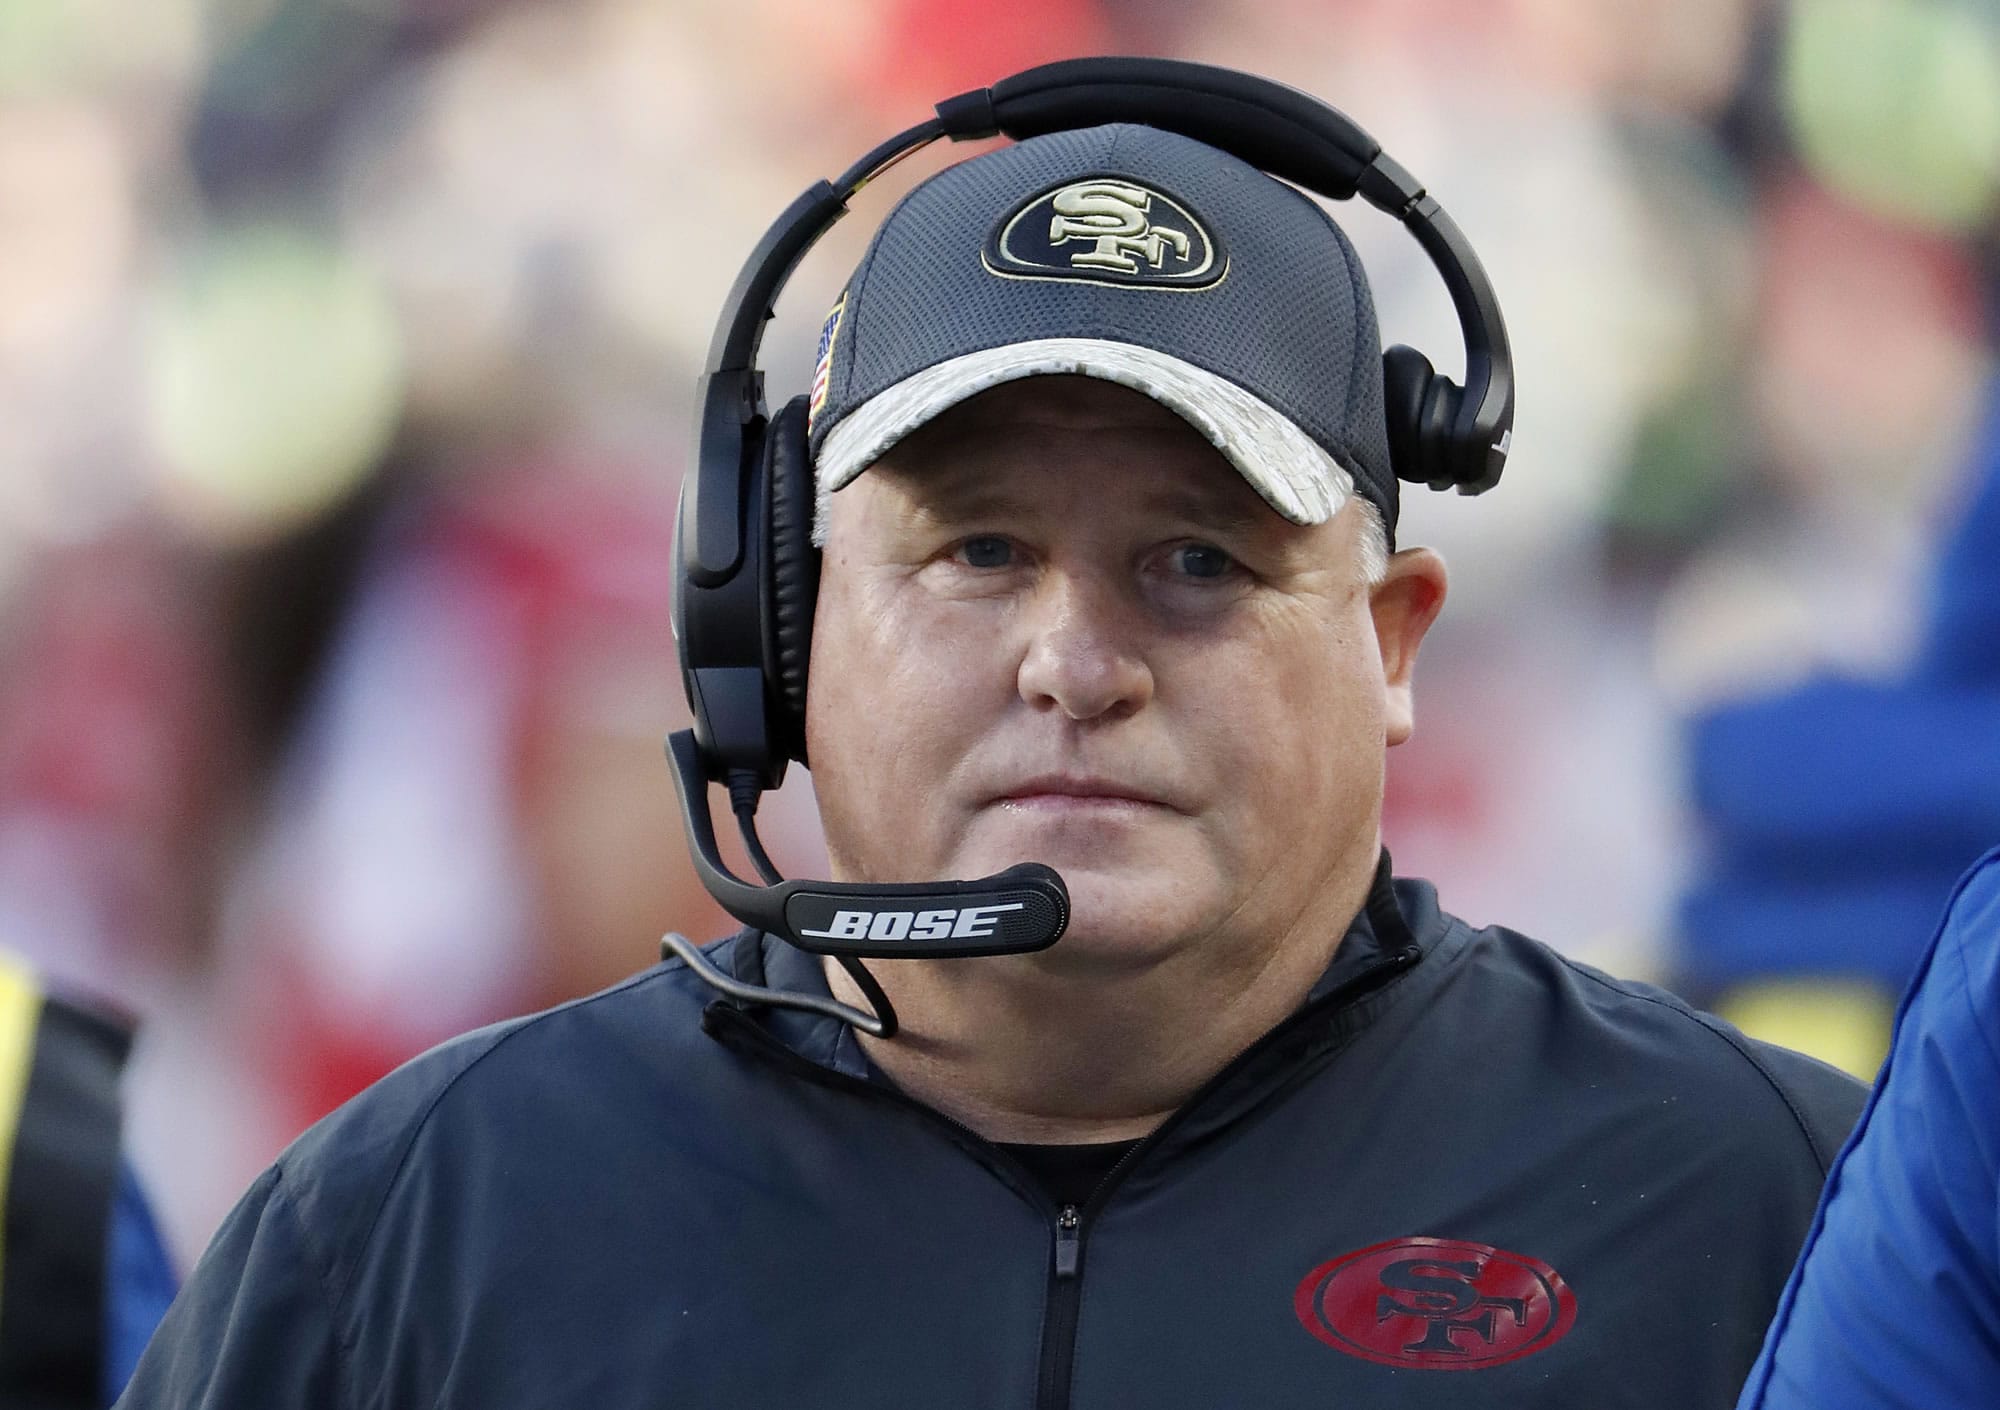 Chip Kelly agreed to a five-year, $23.3 million deal to become UCLA’s football coach on Saturday, Nov. 25, 2017. The former Oregon coach returns to the Pac-12 to replace Jim Mora, who was fired Monday with one game left in his sixth season in Westwood.